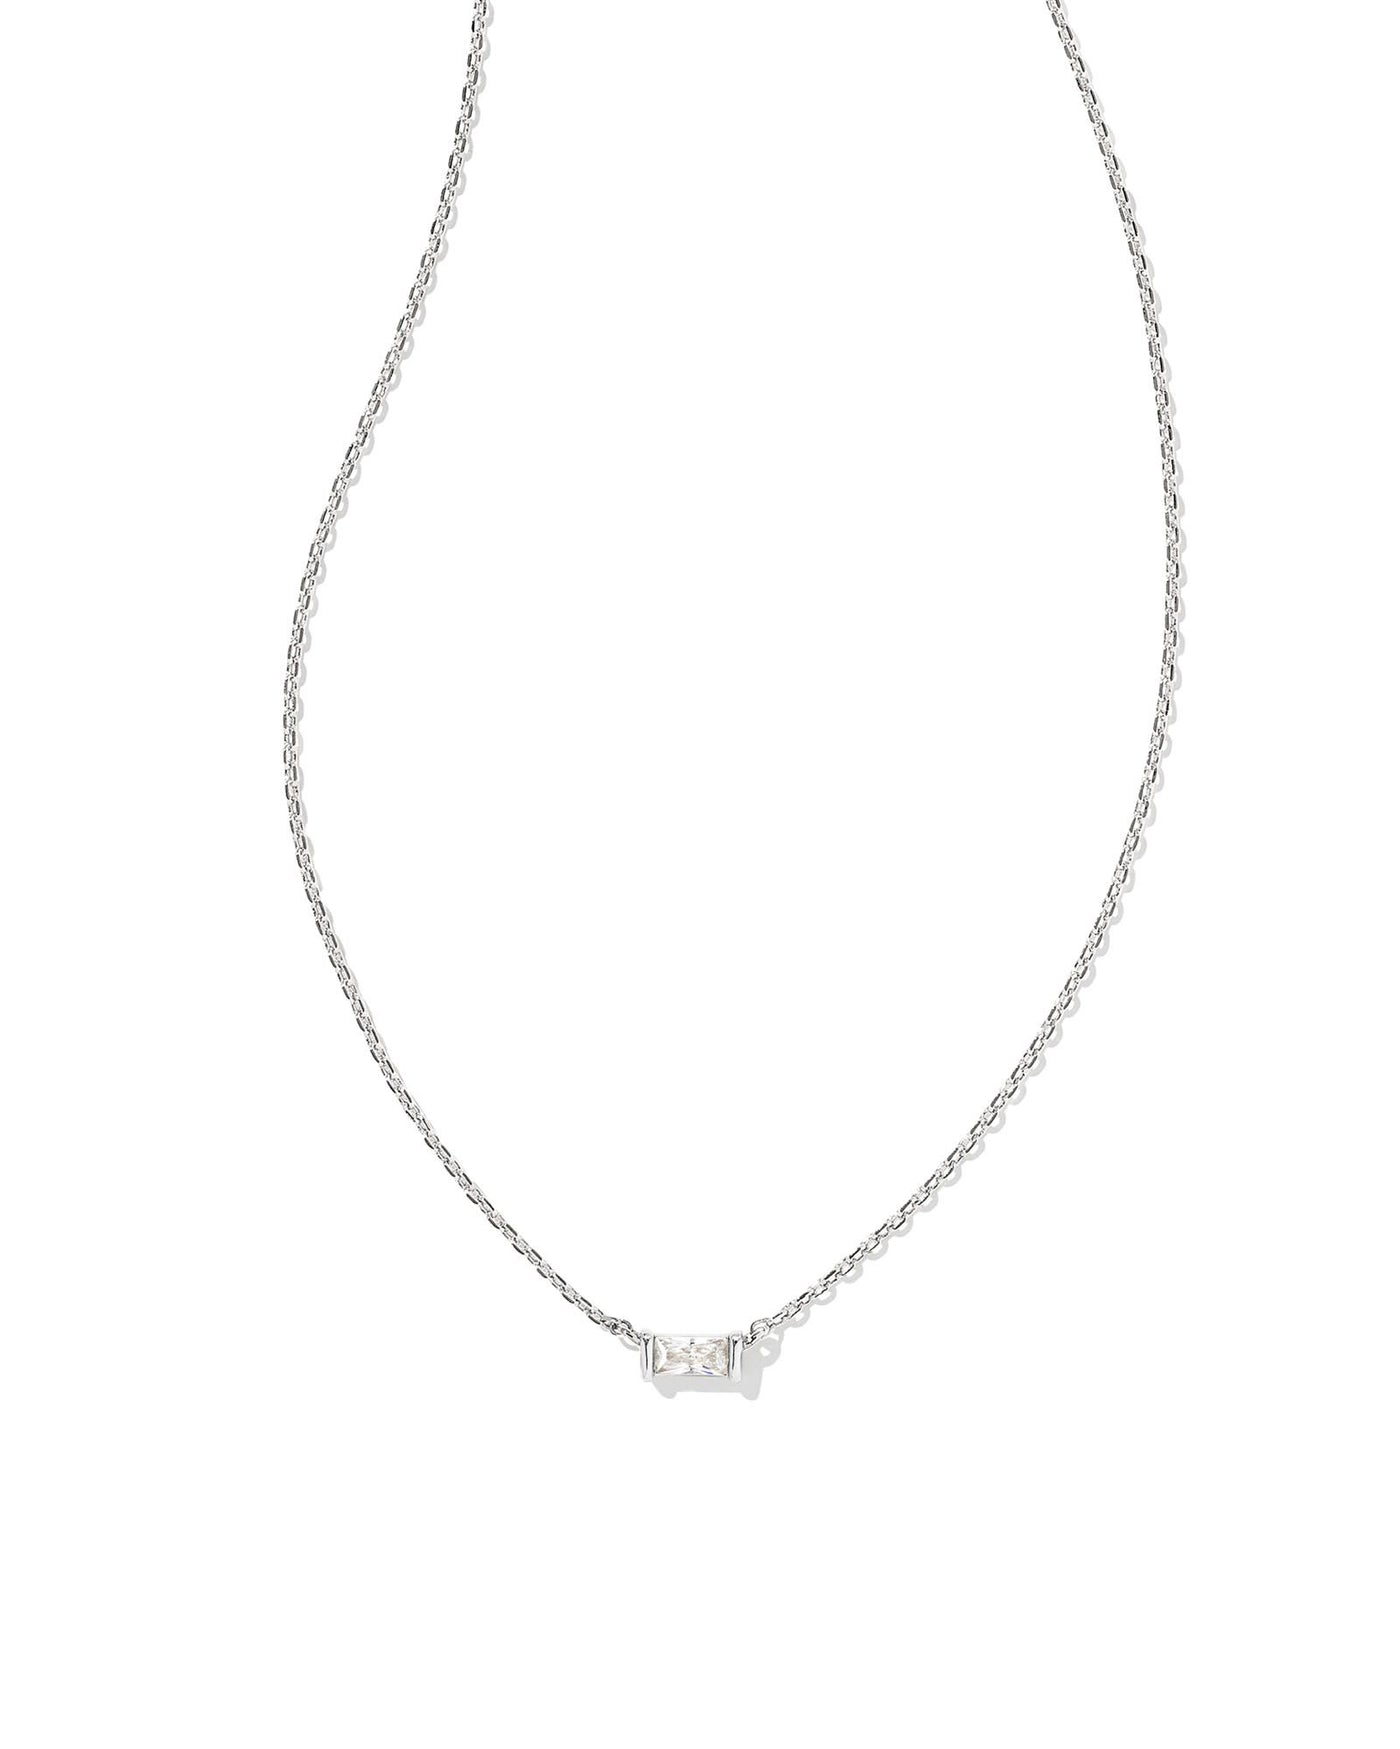 Juliette Pendant Necklace Silver White Crystal on white background, front view.